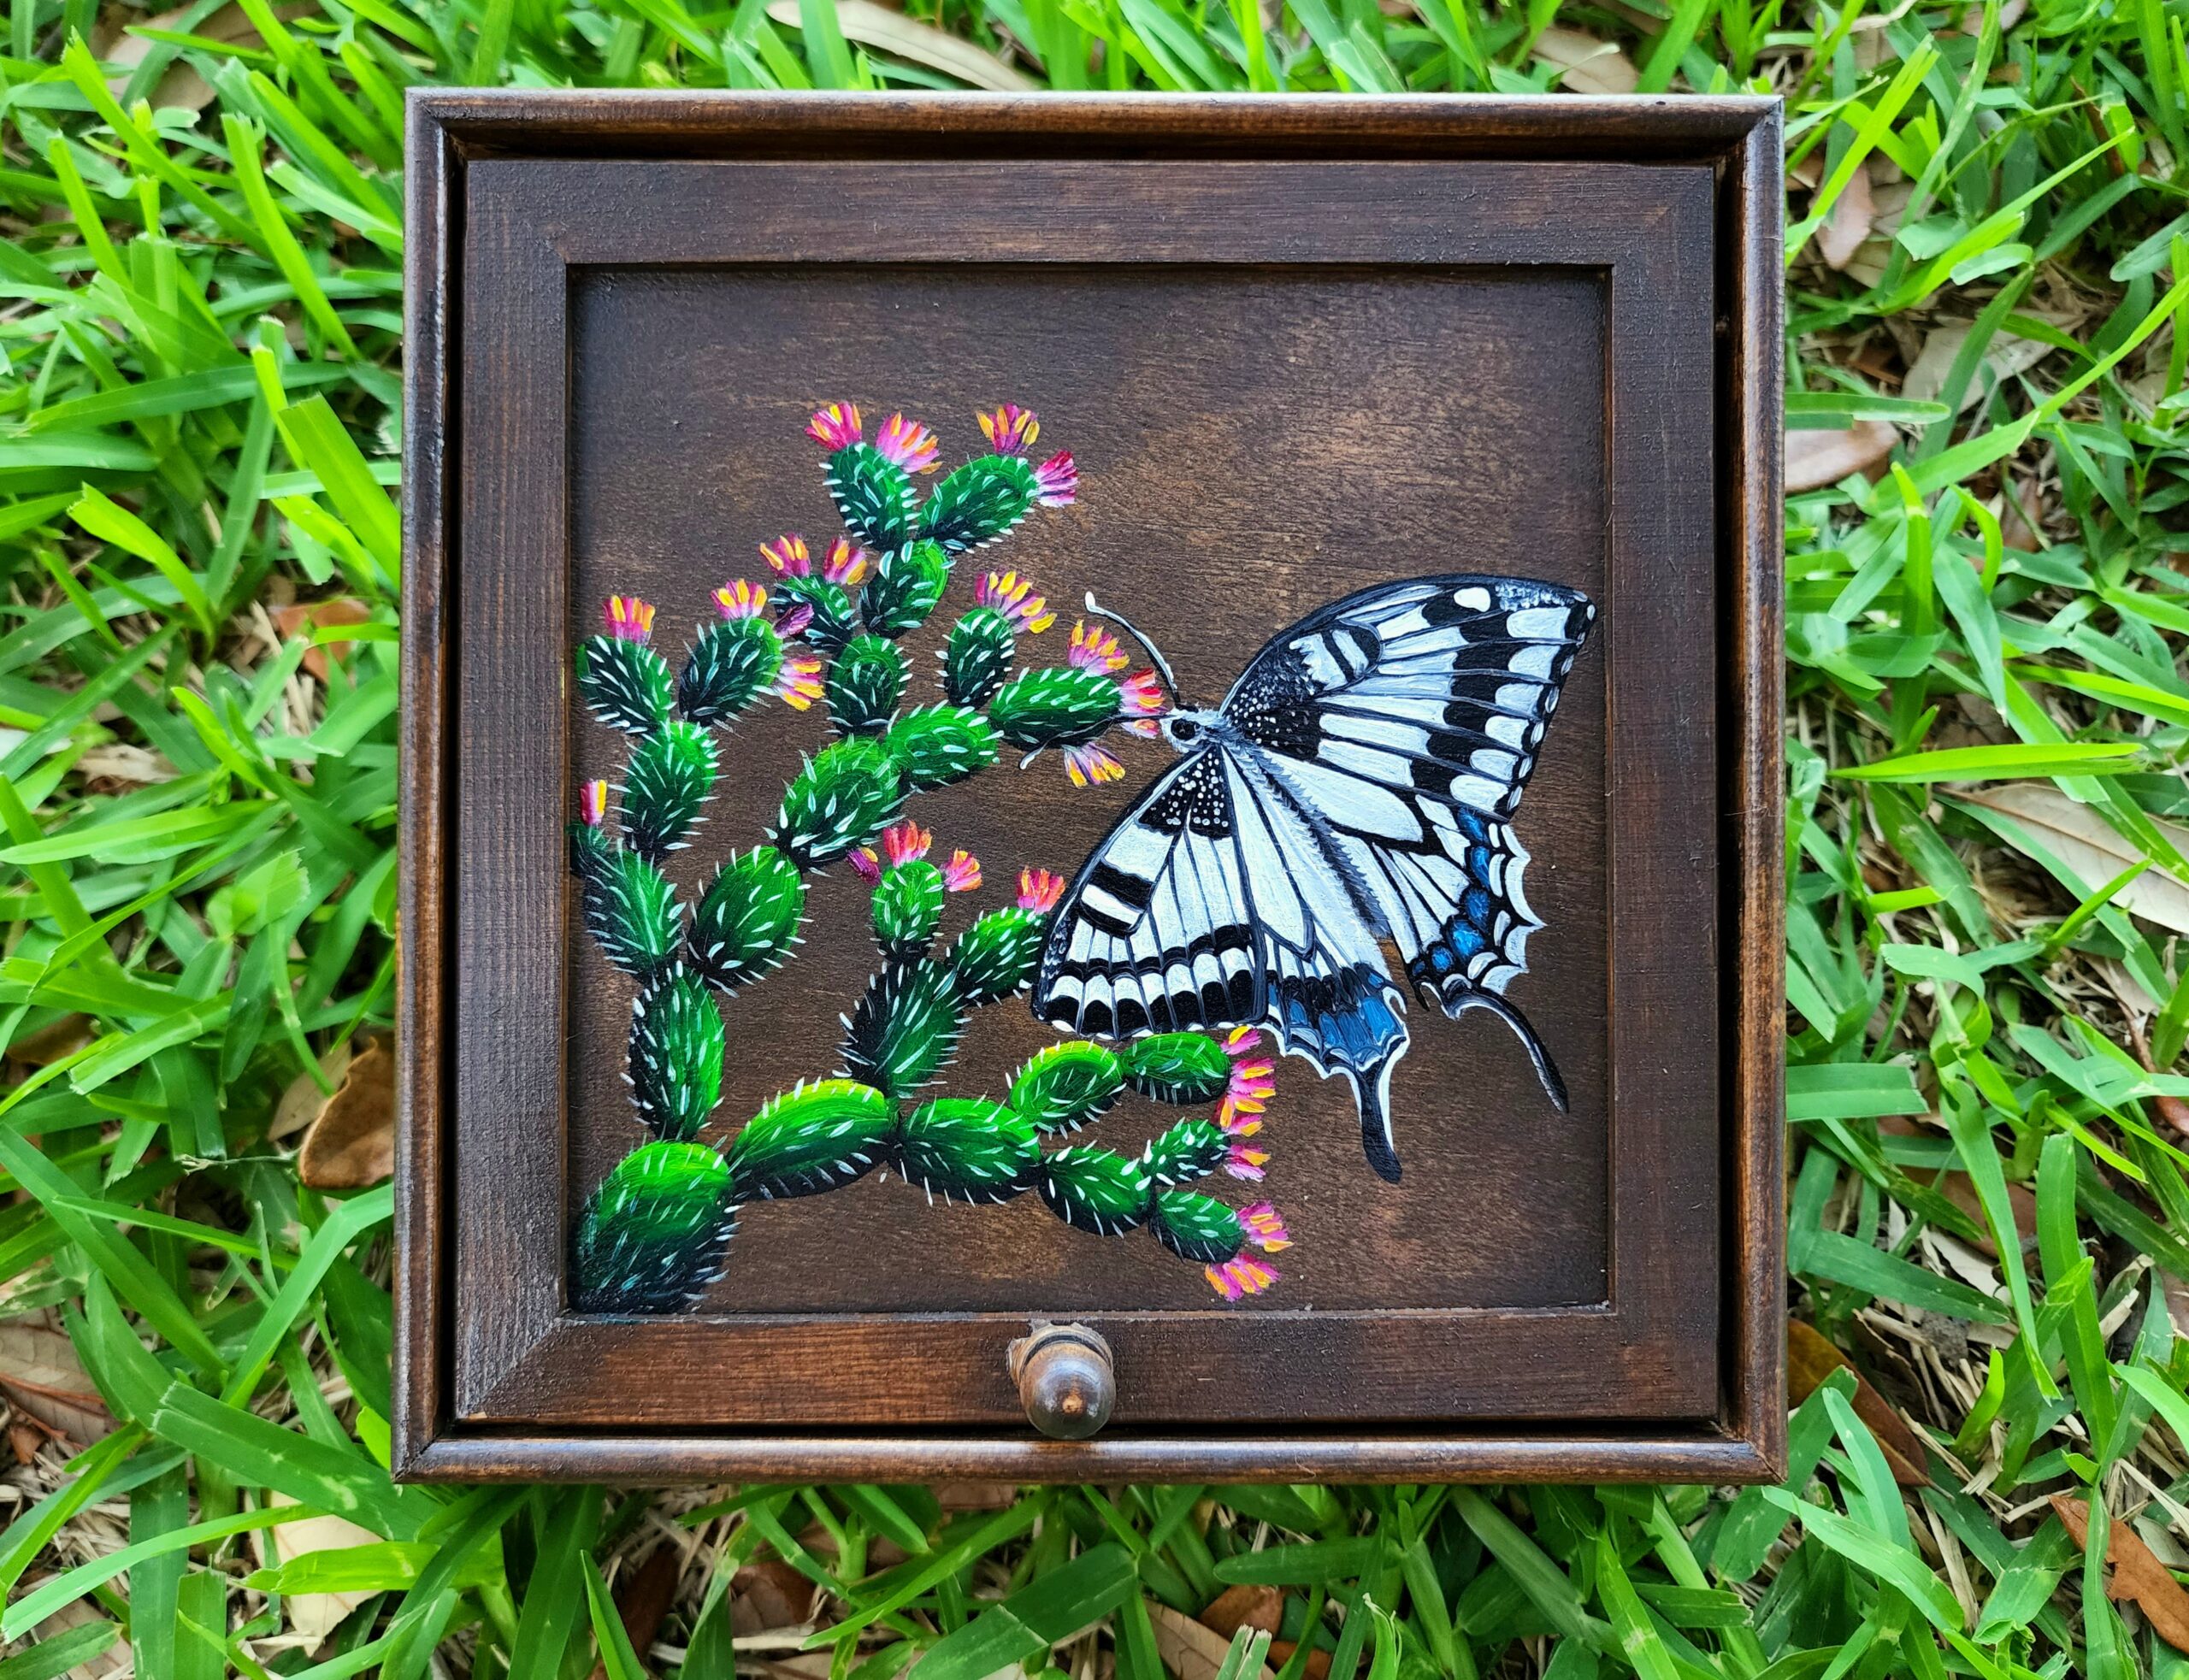 Beautiful handpainted wood trinket box with a mirror and a covered silver leaf handle. This cute trinket box is an ideal gift for a special loved one. You can store jewelry such as rings, necklaces, bracelets, or anything you would like to keep in a particular place, especially in this elegant and artistic trinket box.